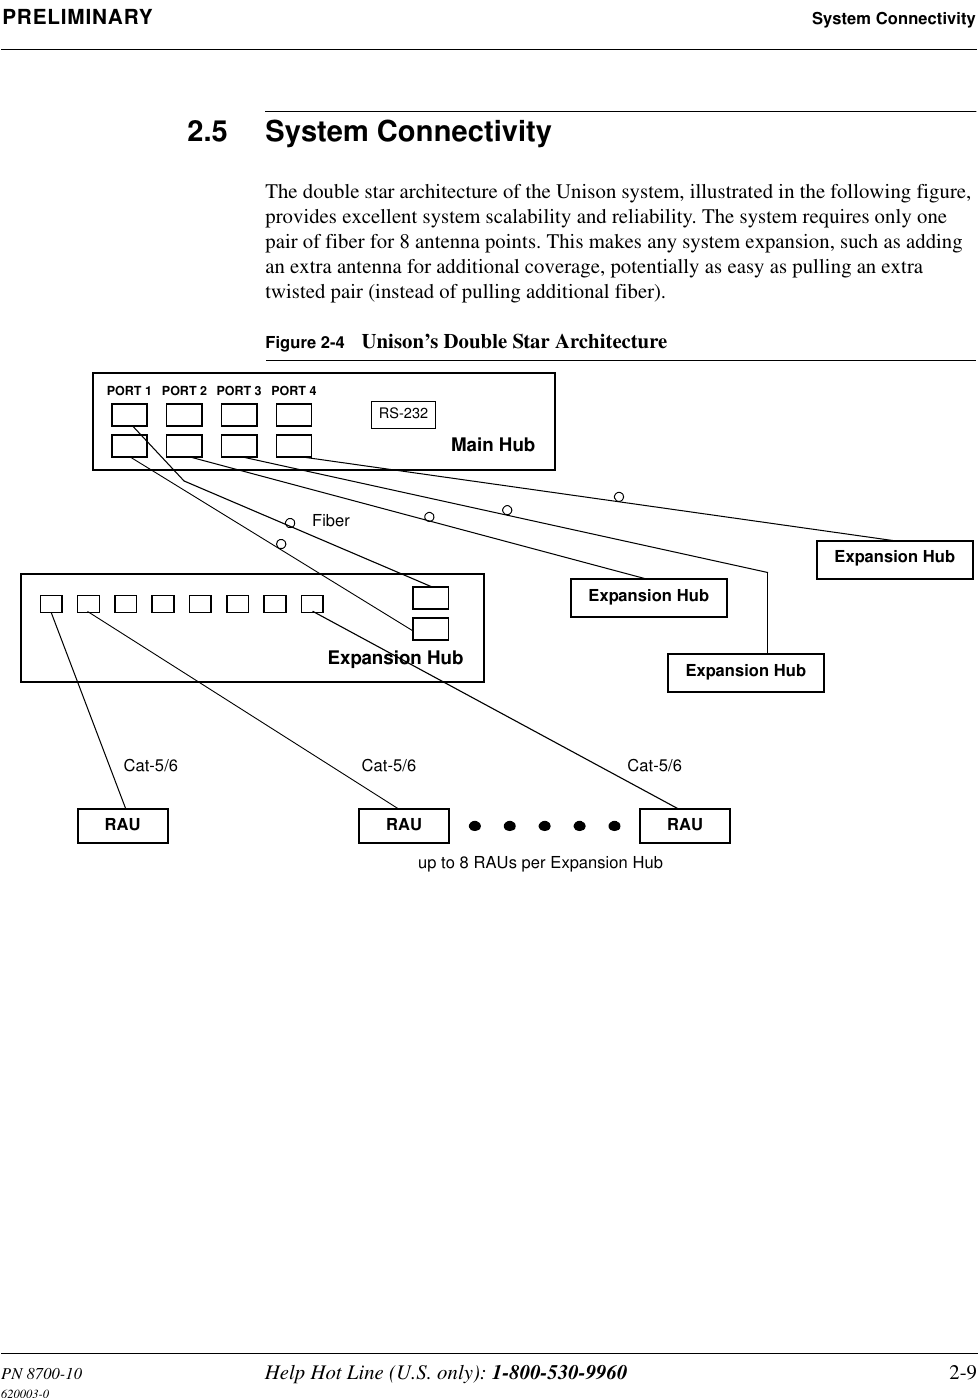 PN 8700-10 Help Hot Line (U.S. only): 1-800-530-9960 2-9620003-0PRELIMINARY System Connectivity2.5 System ConnectivityThe double star architecture of the Unison system, illustrated in the following figure, provides excellent system scalability and reliability. The system requires only one pair of fiber for 8 antenna points. This makes any system expansion, such as adding an extra antenna for additional coverage, potentially as easy as pulling an extra twisted pair (instead of pulling additional fiber).Figure 2-4 Unison’s Double Star ArchitectureMain HubRS-232PORT 1 PORT 2 PORT 3 PORT 4Expansion Hub Expansion HubFiberExpansion HubExpansion HubCat-5/6Cat-5/6 Cat-5/6up to 8 RAUs per Expansion HubRAU RAU RAU